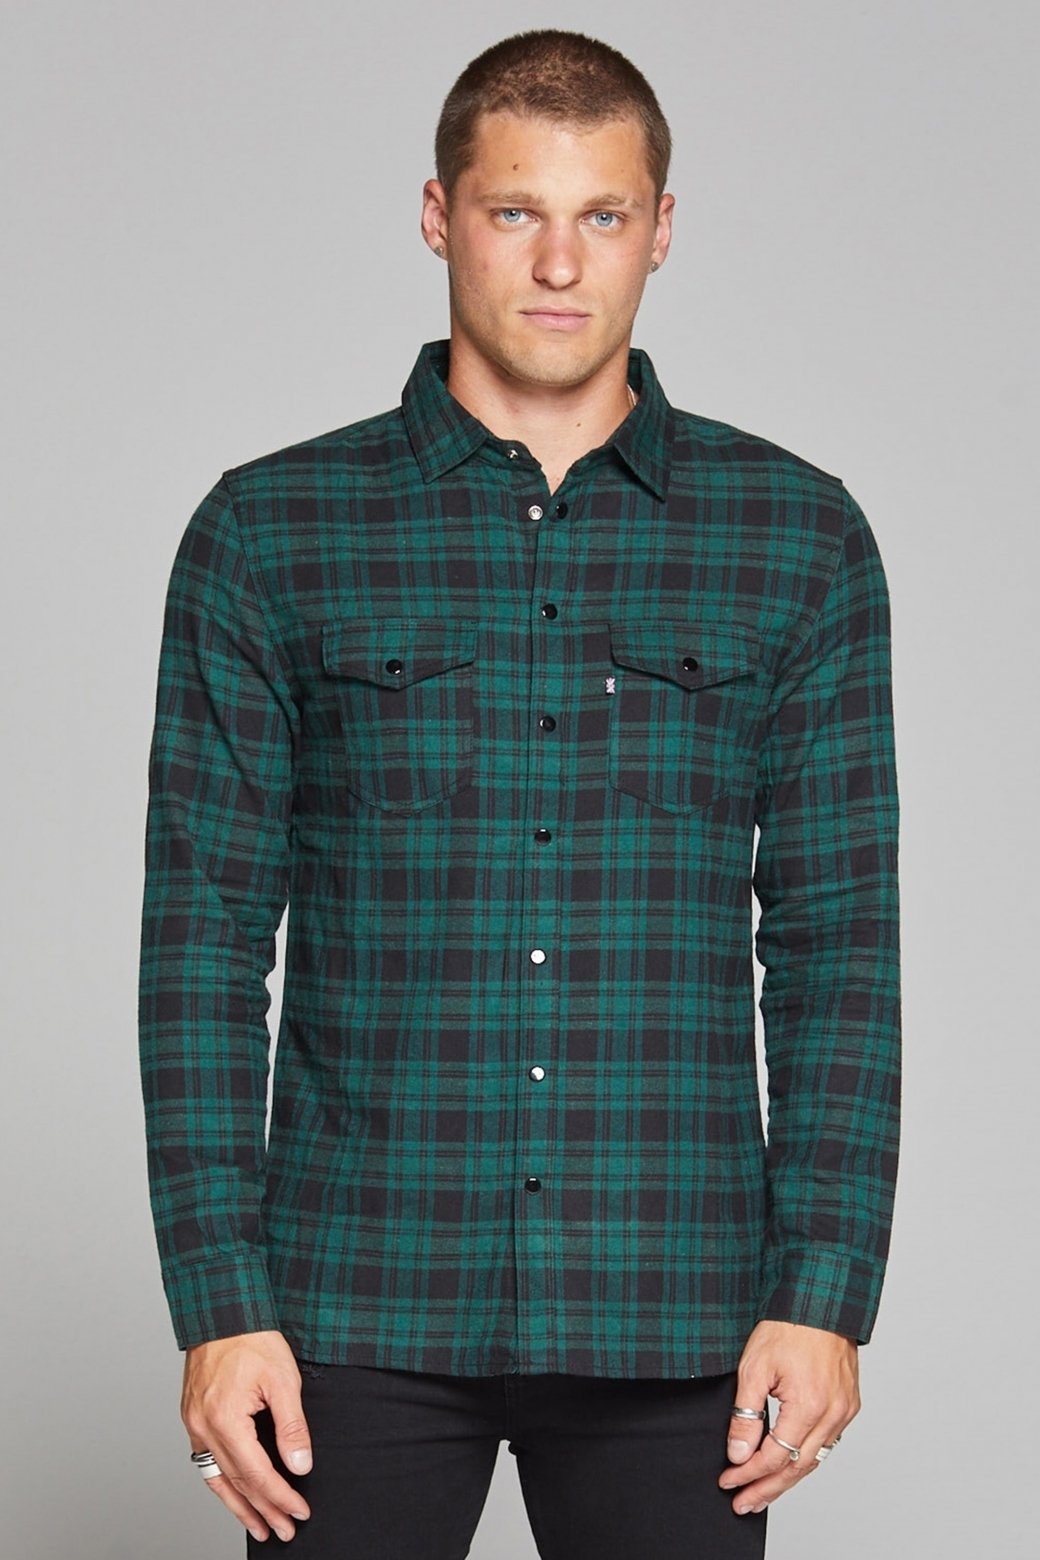 Check Flannel Green Shirt Buy Good For Nothing available in store USA Fresh Clothing DC Washington DC 